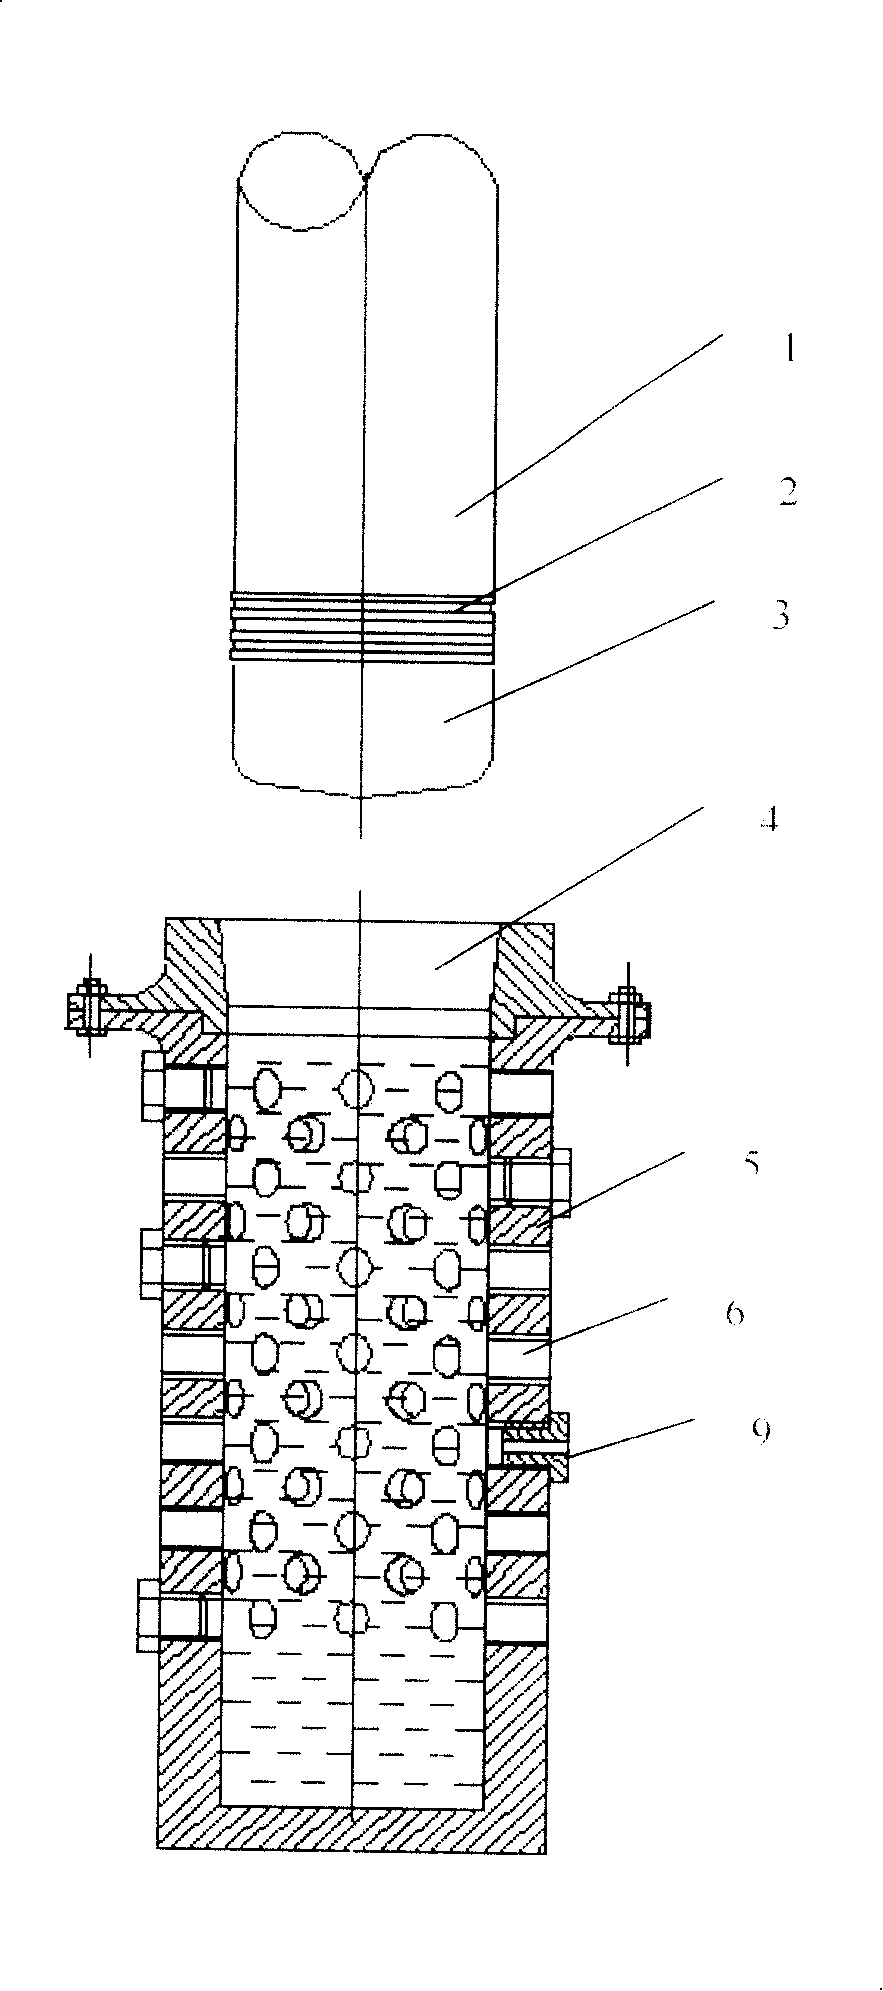 Hydraulic damping energy-absorbing device